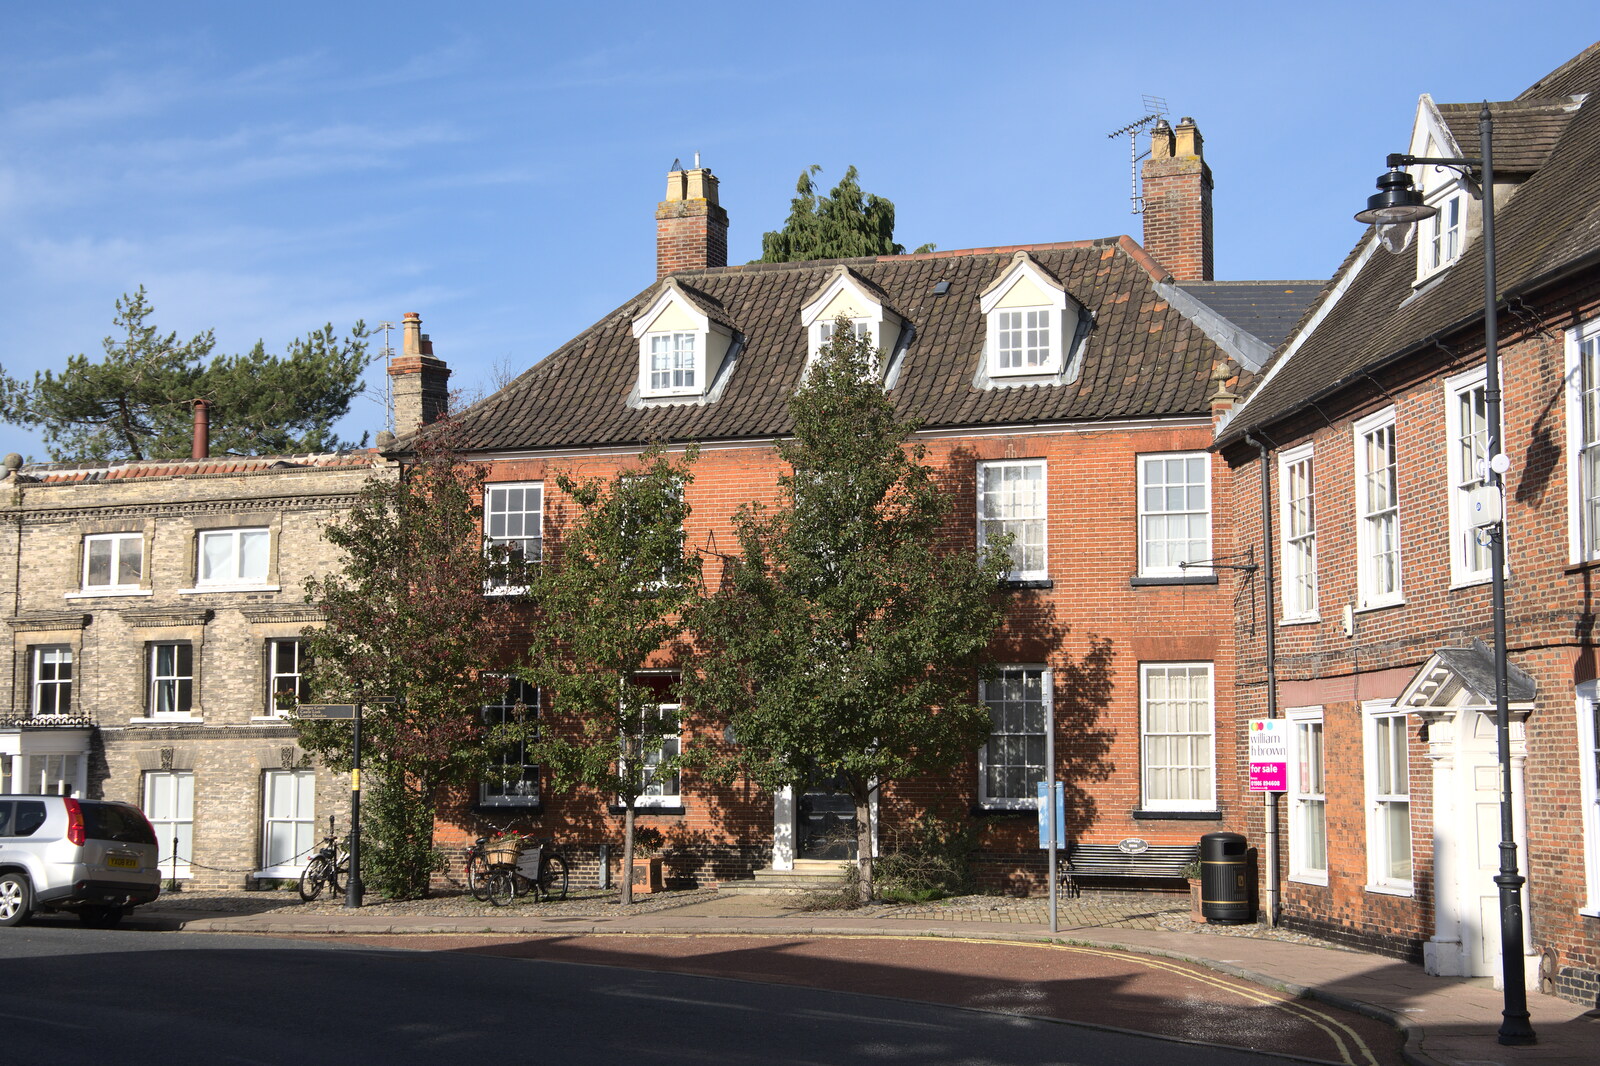 A Postcard from Bungay, Suffolk - 2nd November 2022: Another nice building on Earsham Street